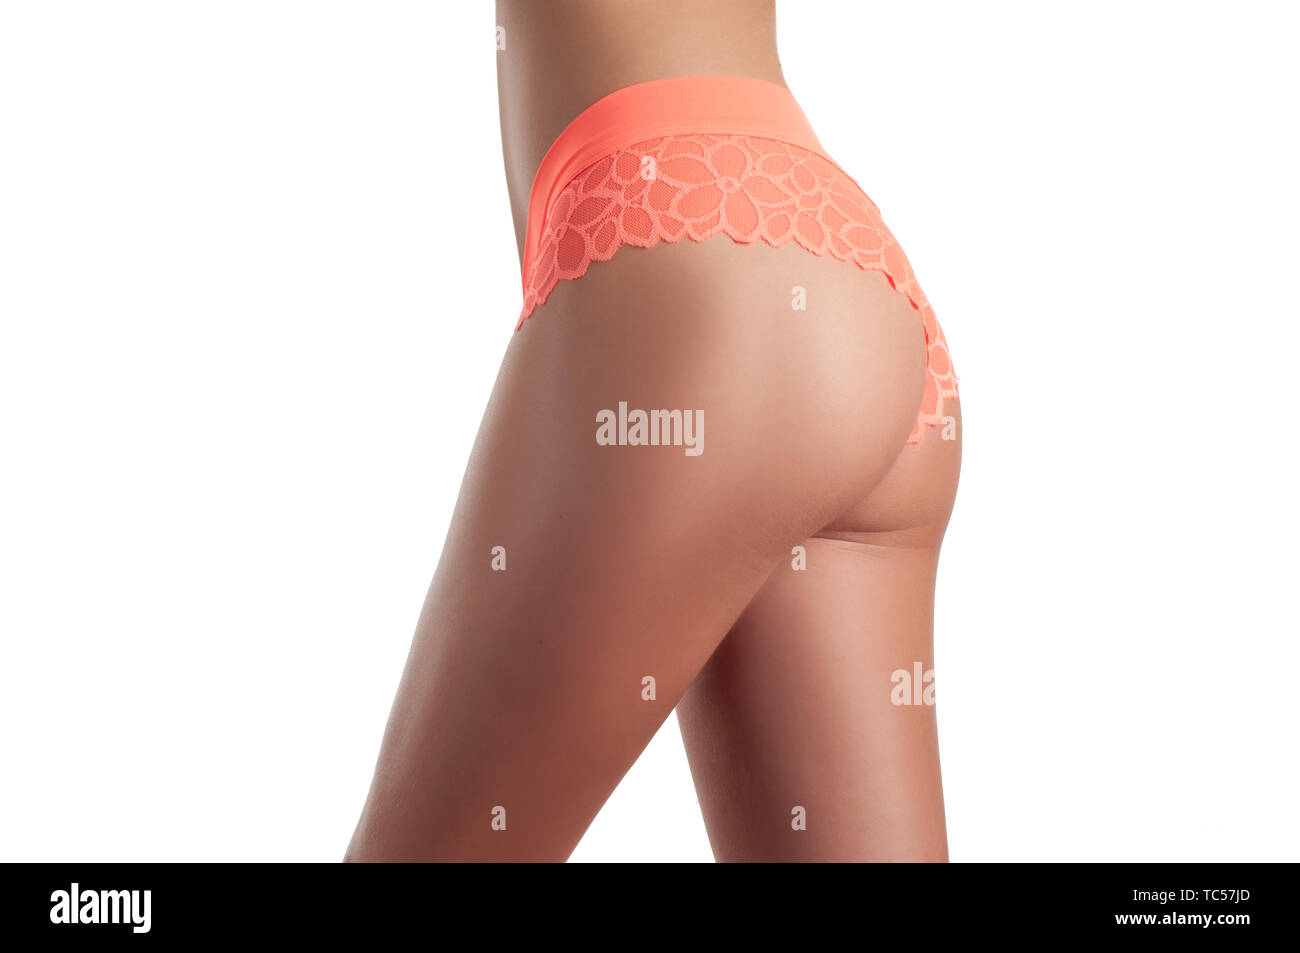 https://c8.alamy.com/comp/TC57JD/skin-care-and-anti-cellulite-massage-perfect-female-buttocks-without-cellulite-in-panties-beautiful-womans-butt-in-underwear-slim-fit-woman-body-TC57JD.jpg